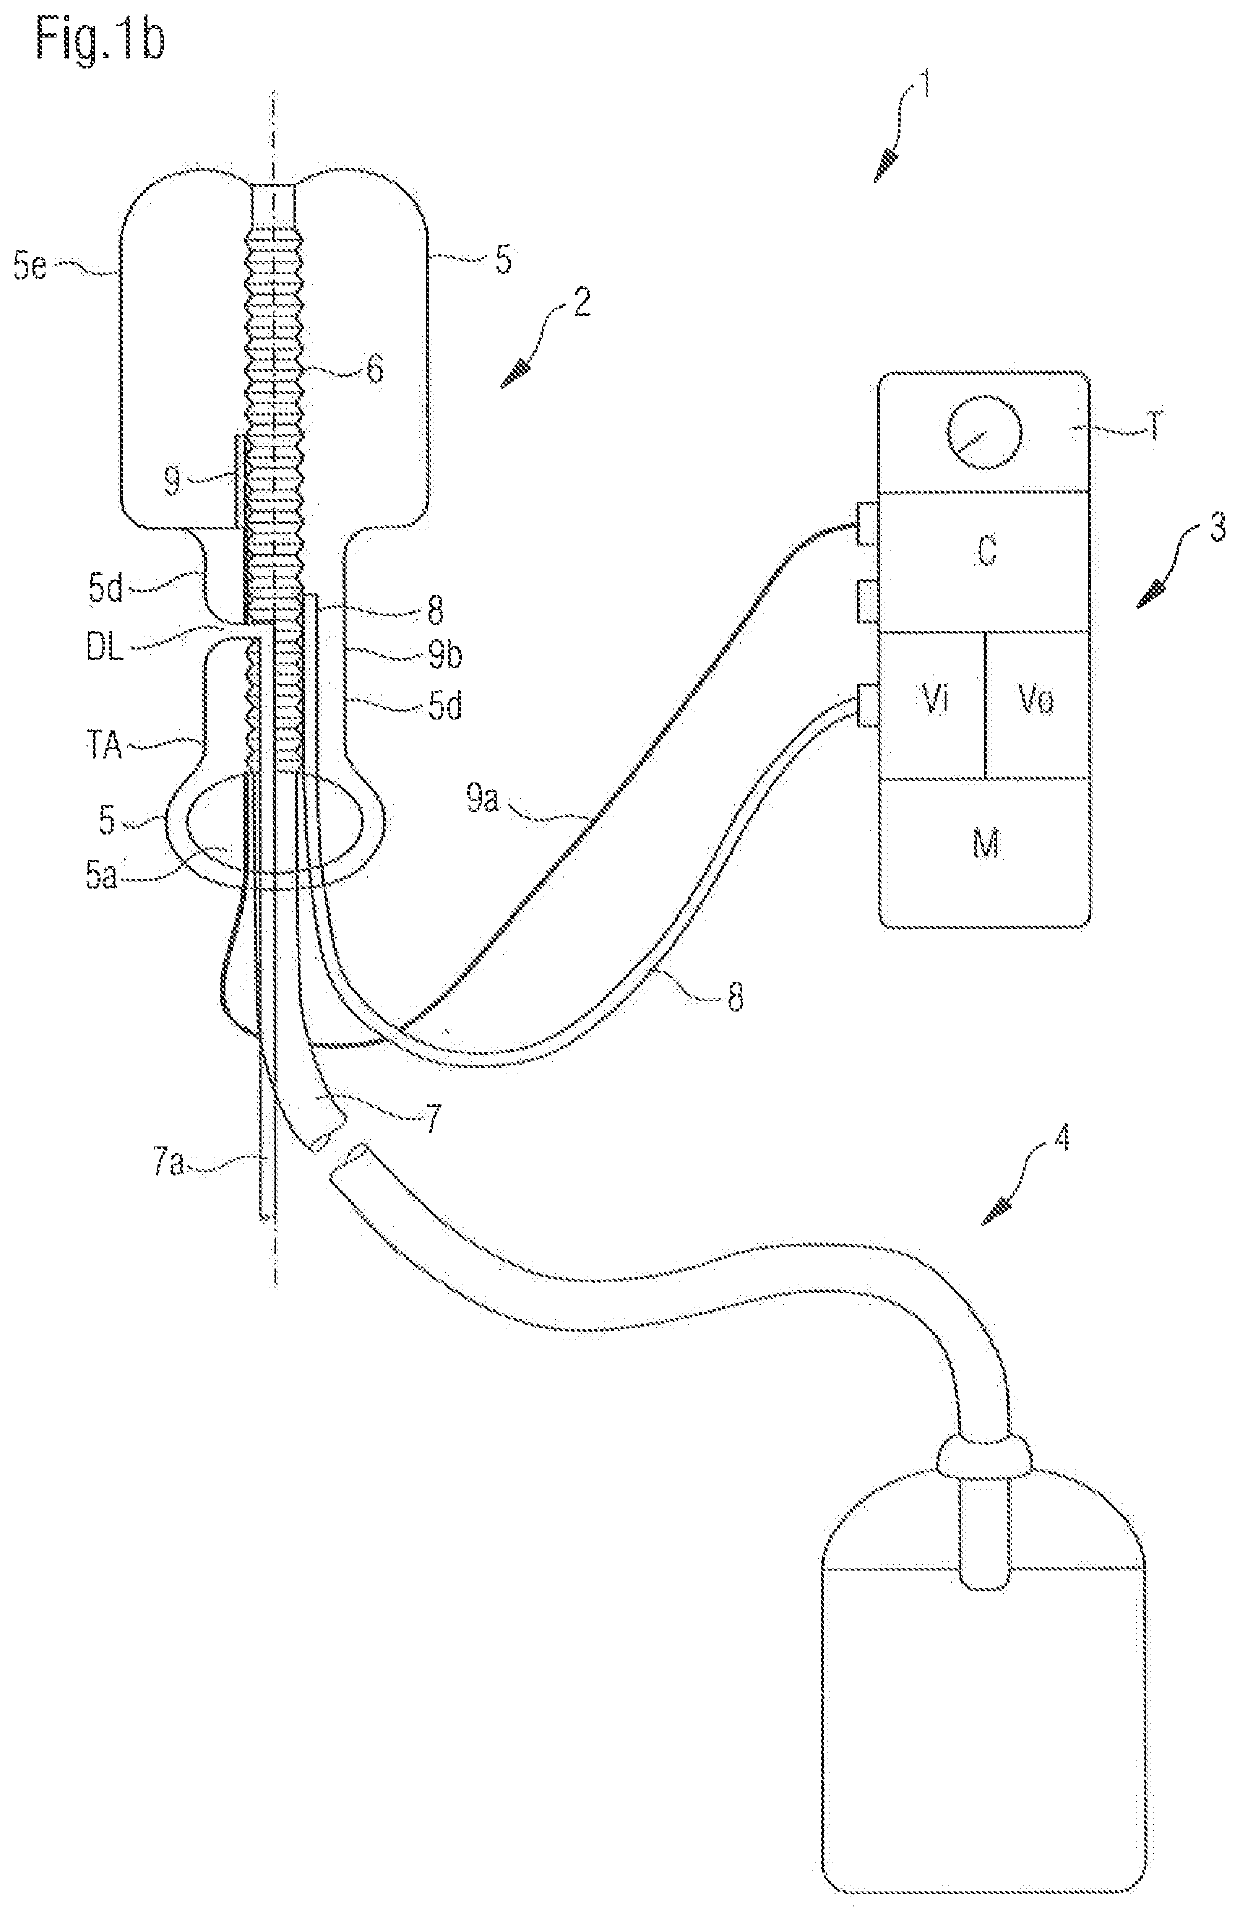 Device for tamponade sealing protection of surgical sutures and wounds, in particular of end-to-end anastomoses of the rectum